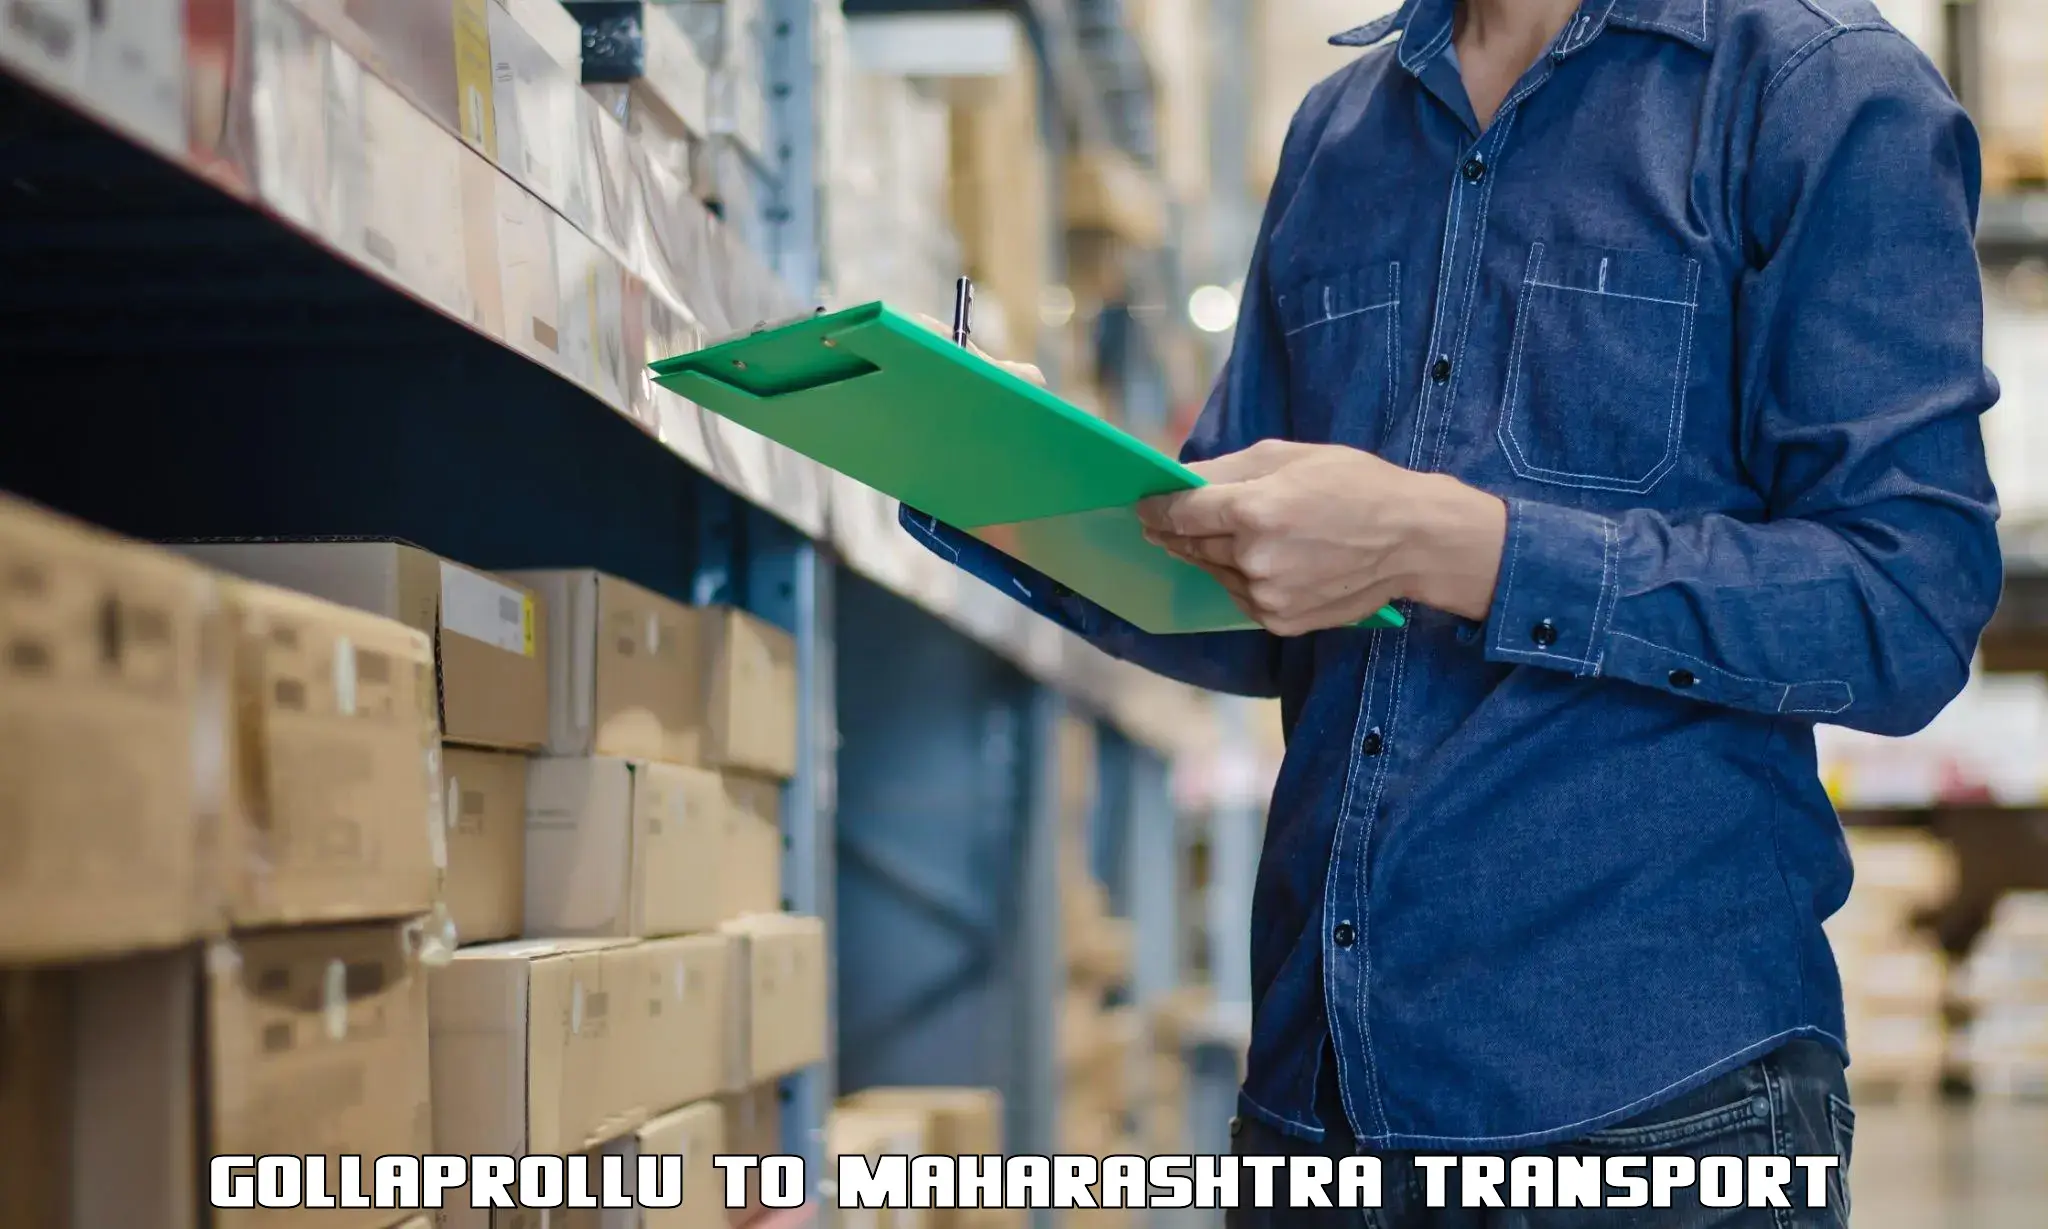 Package delivery services Gollaprollu to Paratwada